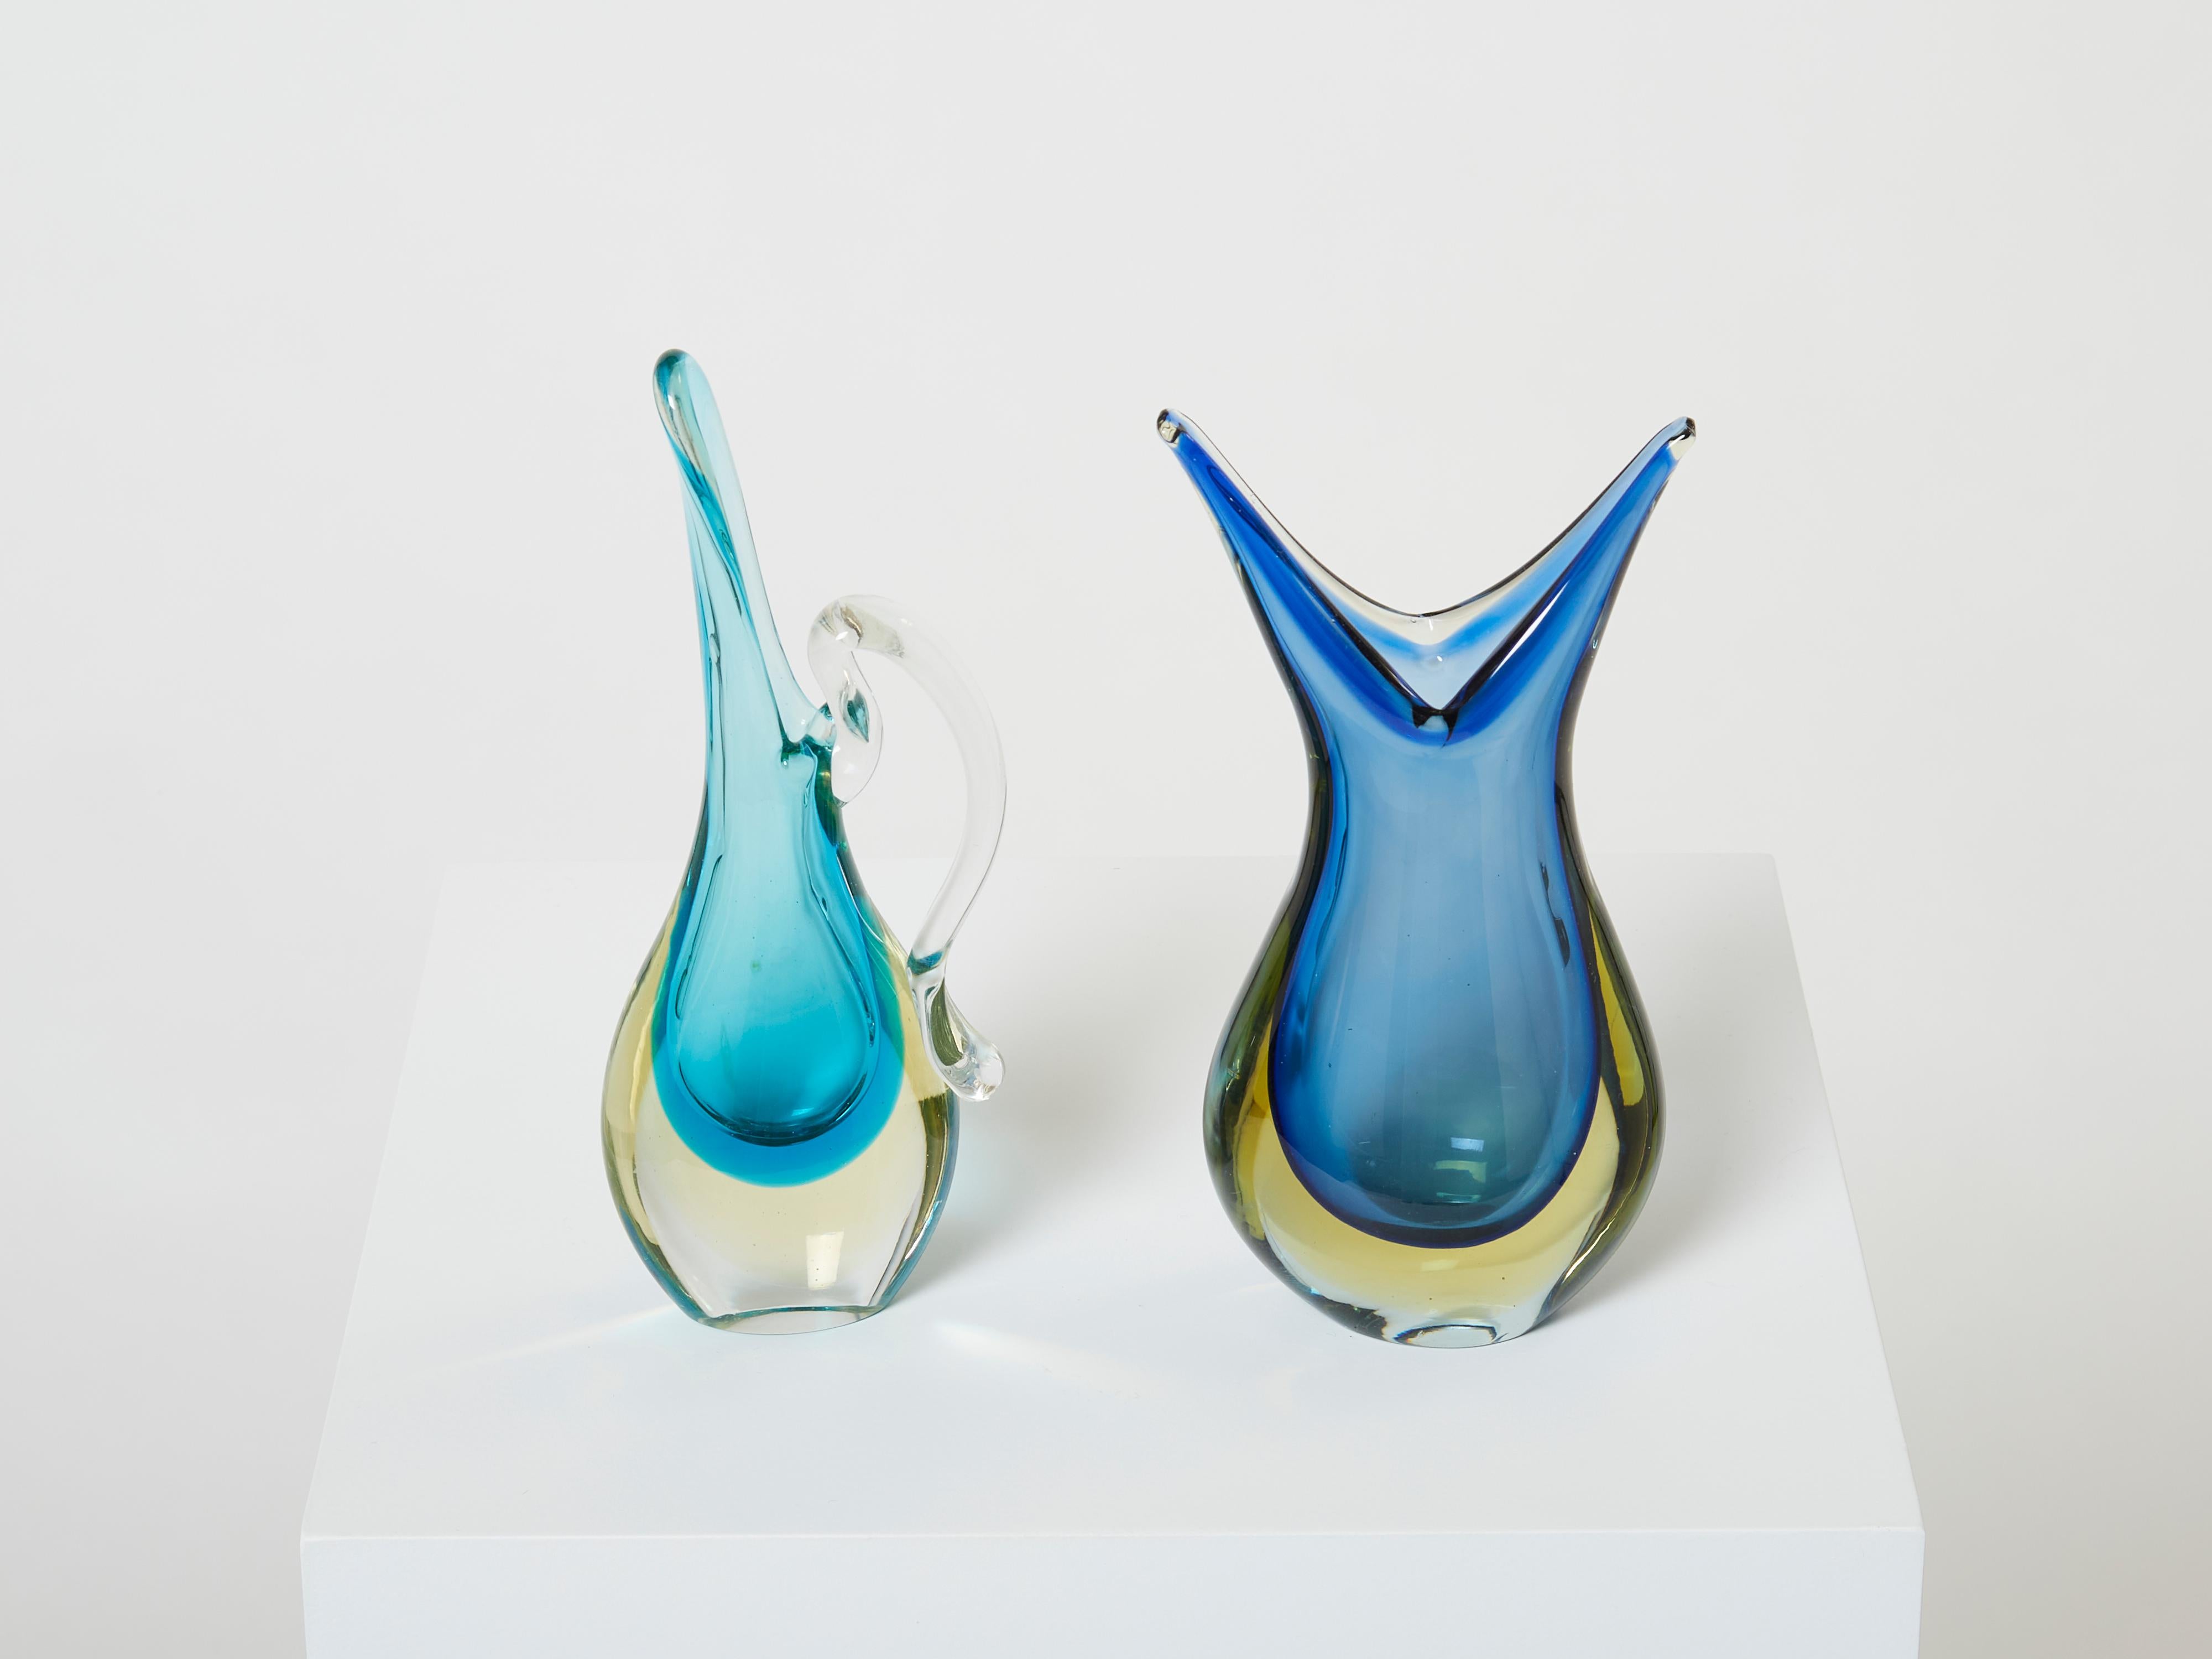 Beautiful set of two Sommerso Murano glass vases made in the 1970s. These two small vases have nice soft colors, with blue glass submerged into light yellow glass, finished with clear glass. The two are found in a very good vintage condition. On